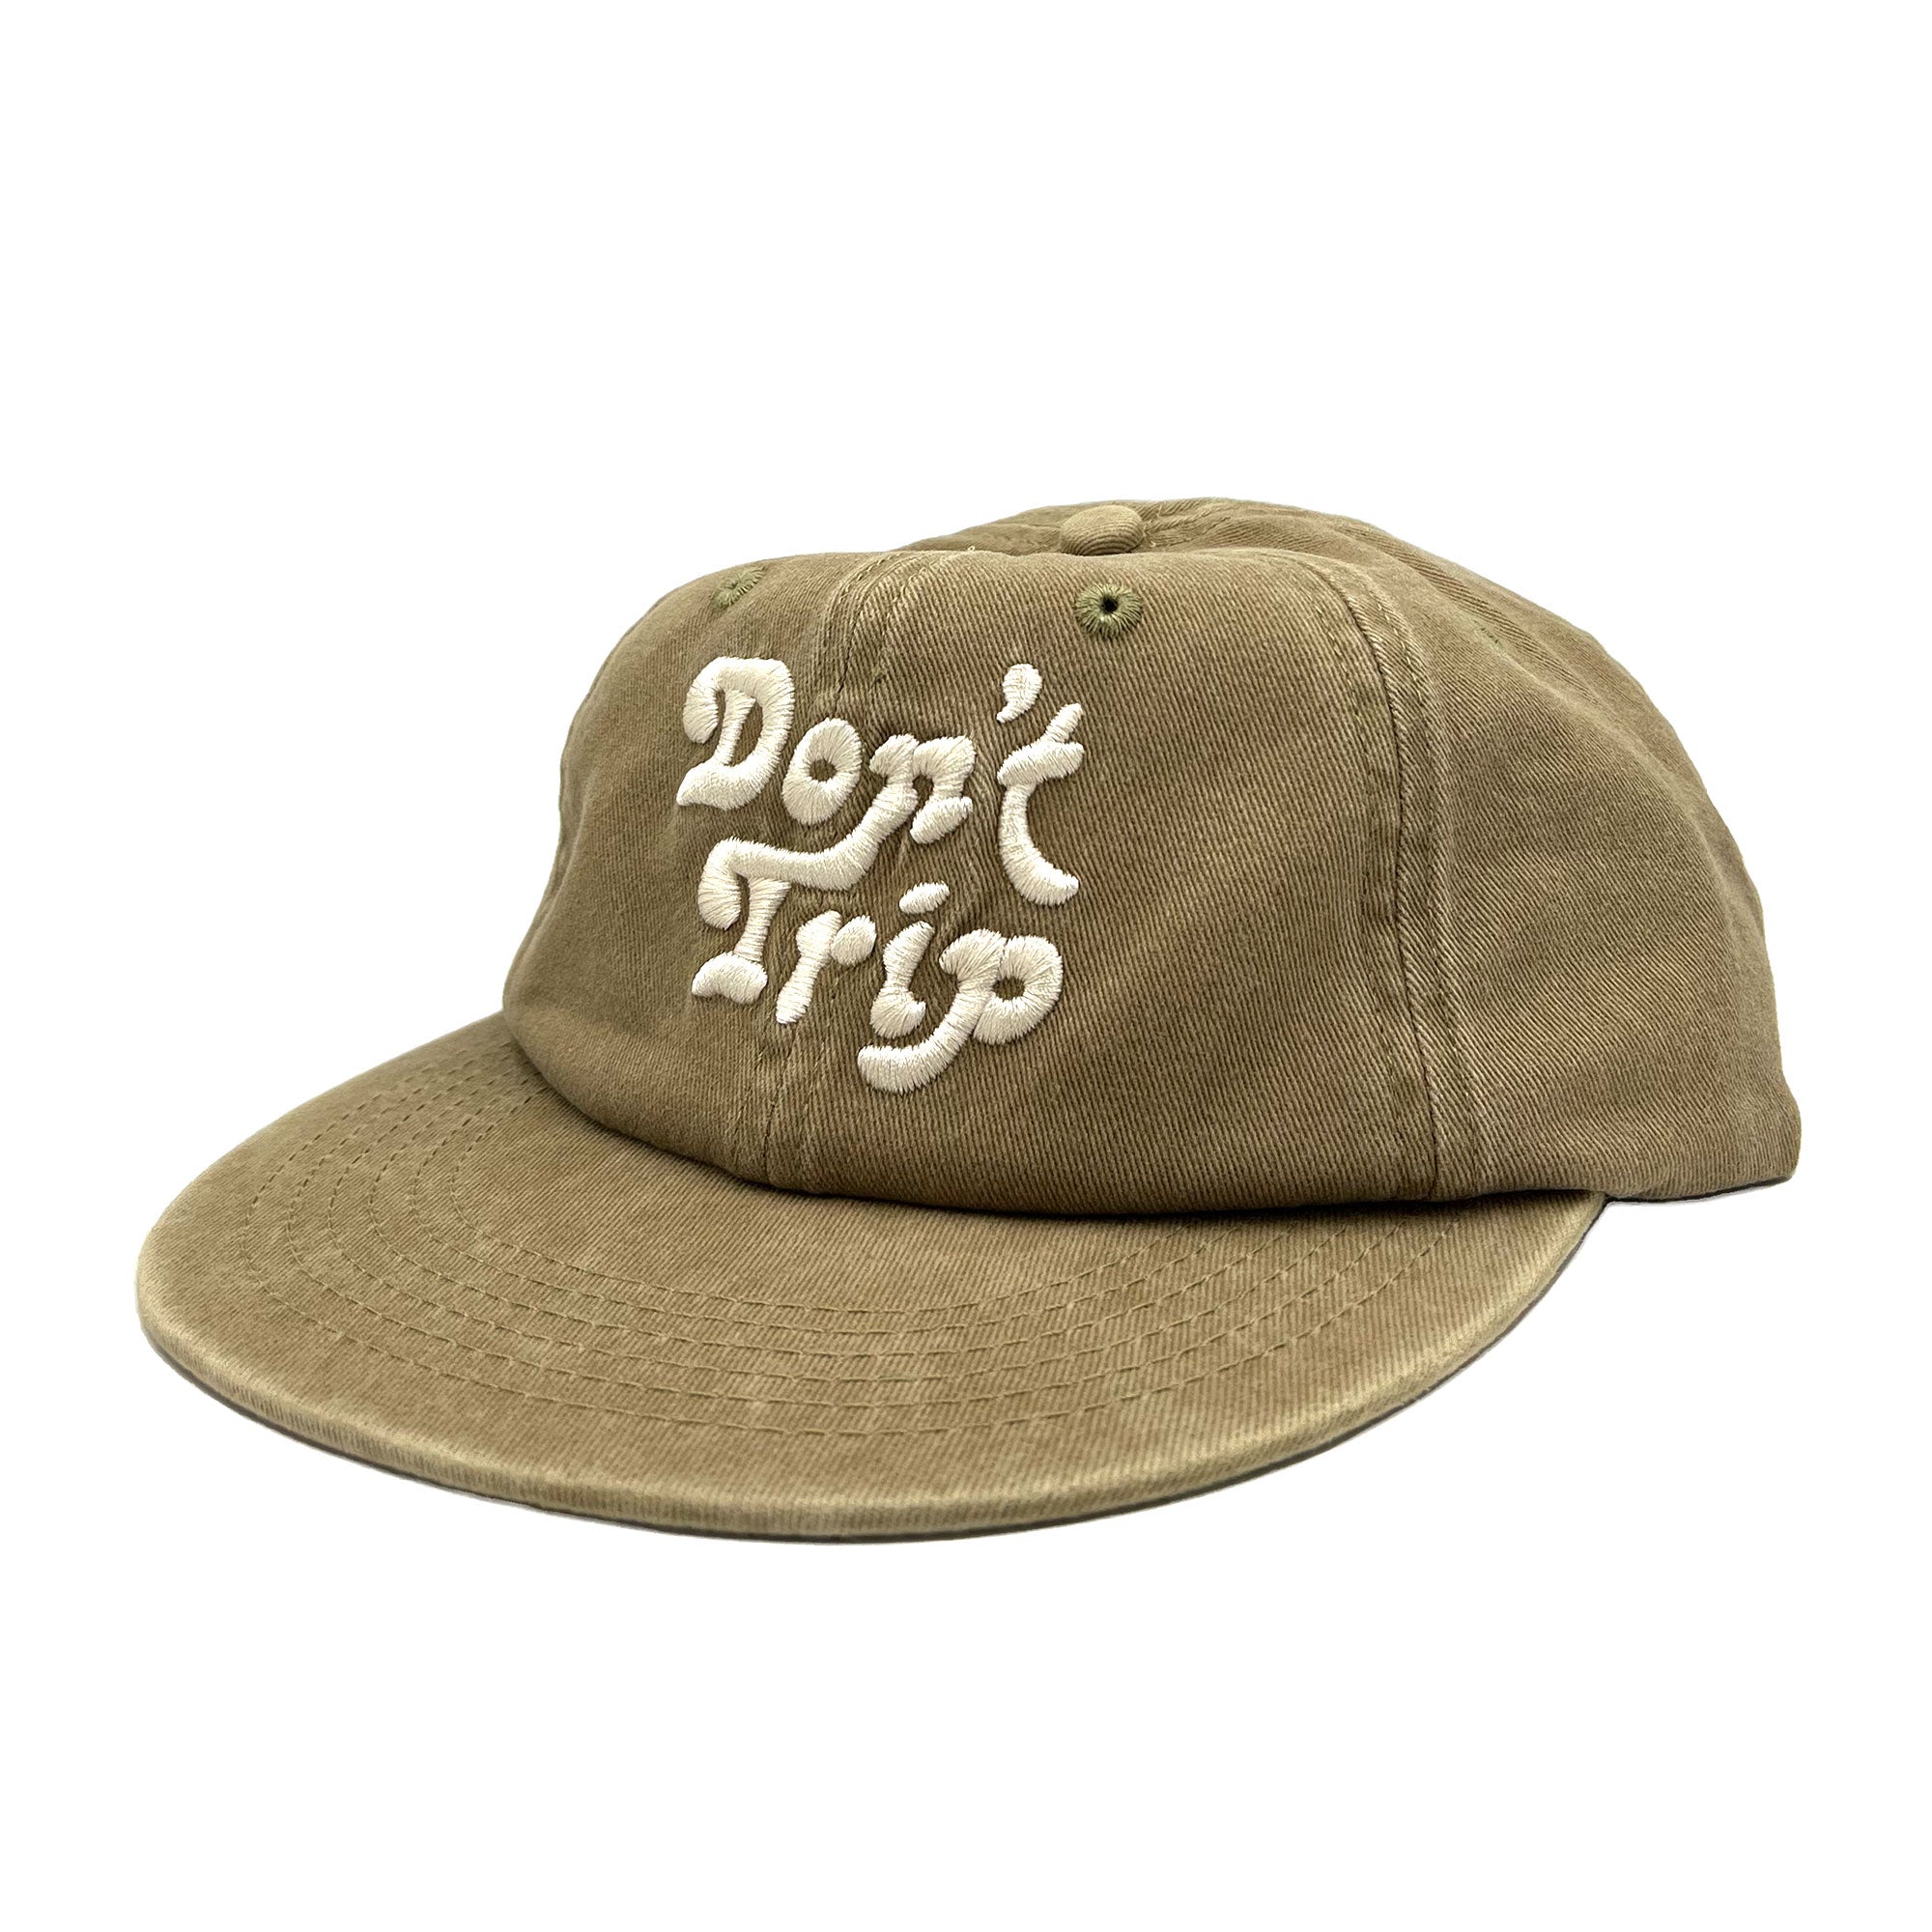 Don't Trip washed khaki hat with white embroidered Don't Trip logo on white background - Free & Easy